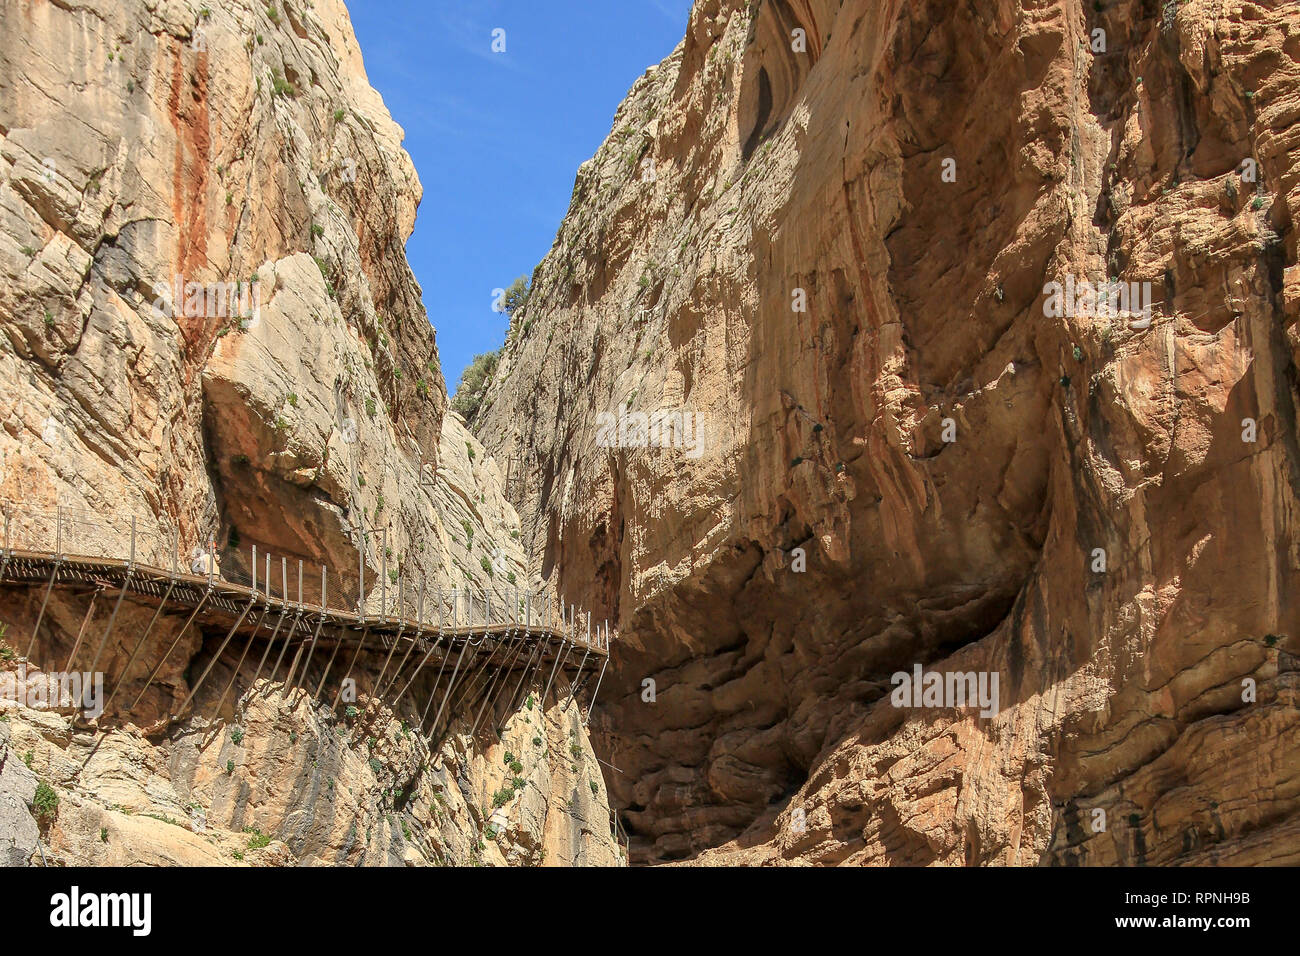 Caminito del Rey (The King's Little Path) is a walkway, pinned along the steep walls in the  Desfiladero de los Gaitanes (Gaitanes Ravine) Stock Photo